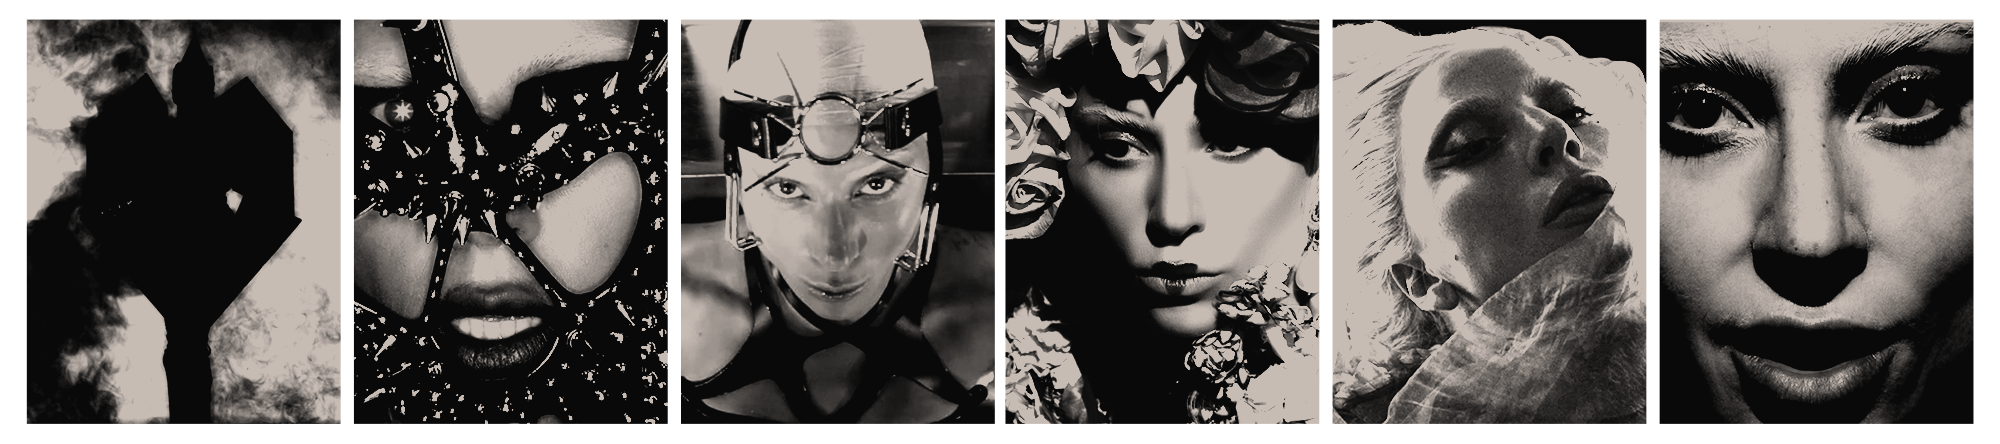 Black and white high contrast portraits of Lady Gaga